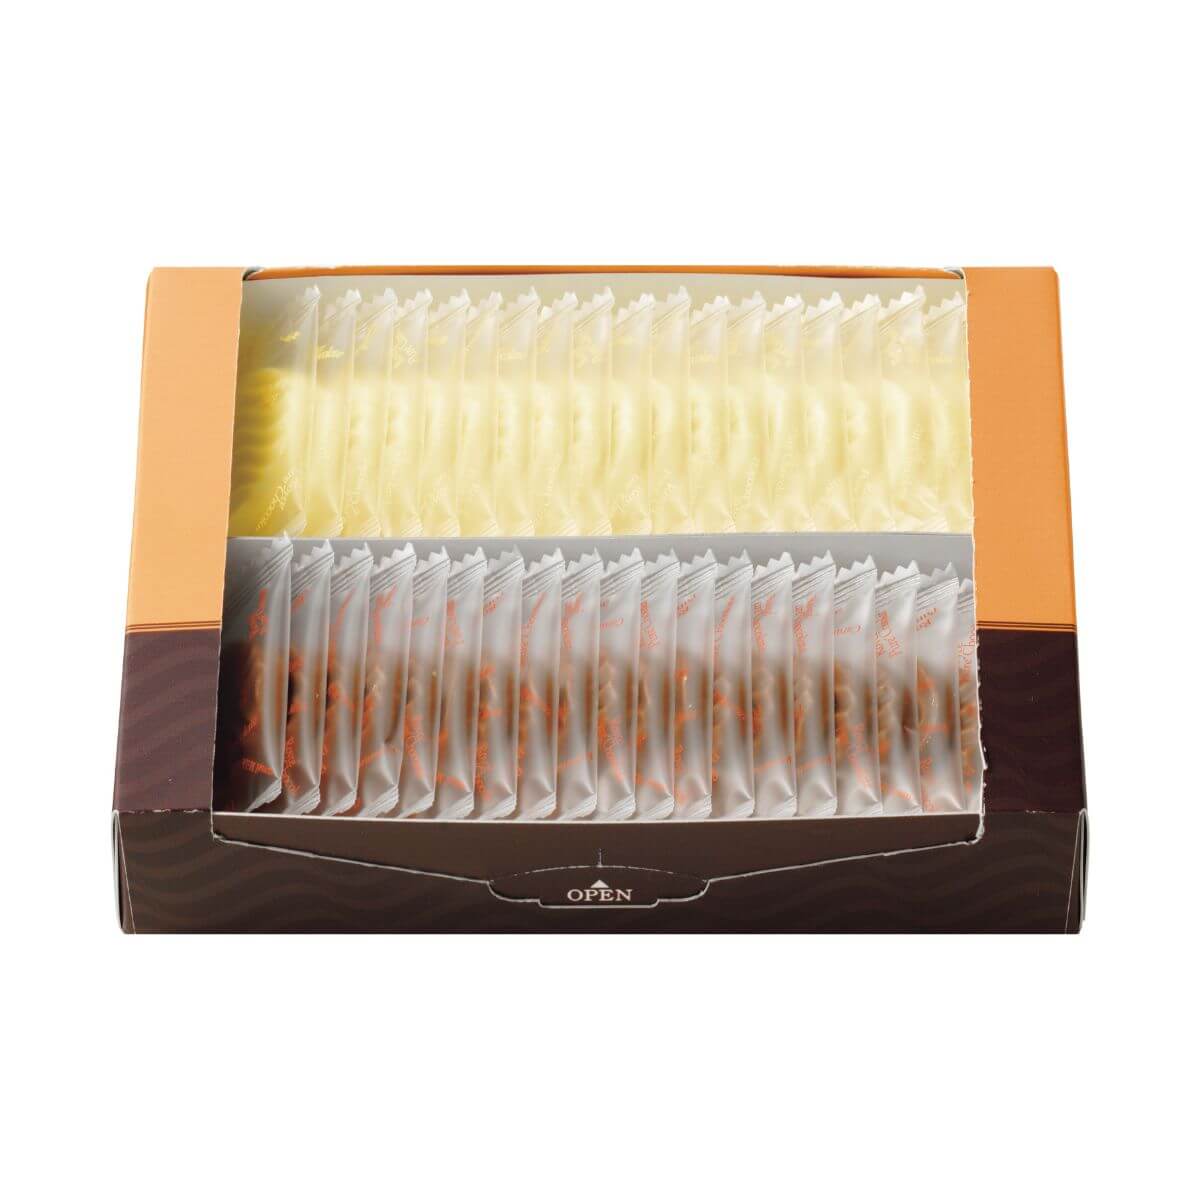 ROYCE' Chocolate - Pure Chocolate "Caramel Milk & Creamy White" - Image shows a box in yellow and brown filled with individually wrapped white chocolates on top and brown chocolates on bottom.